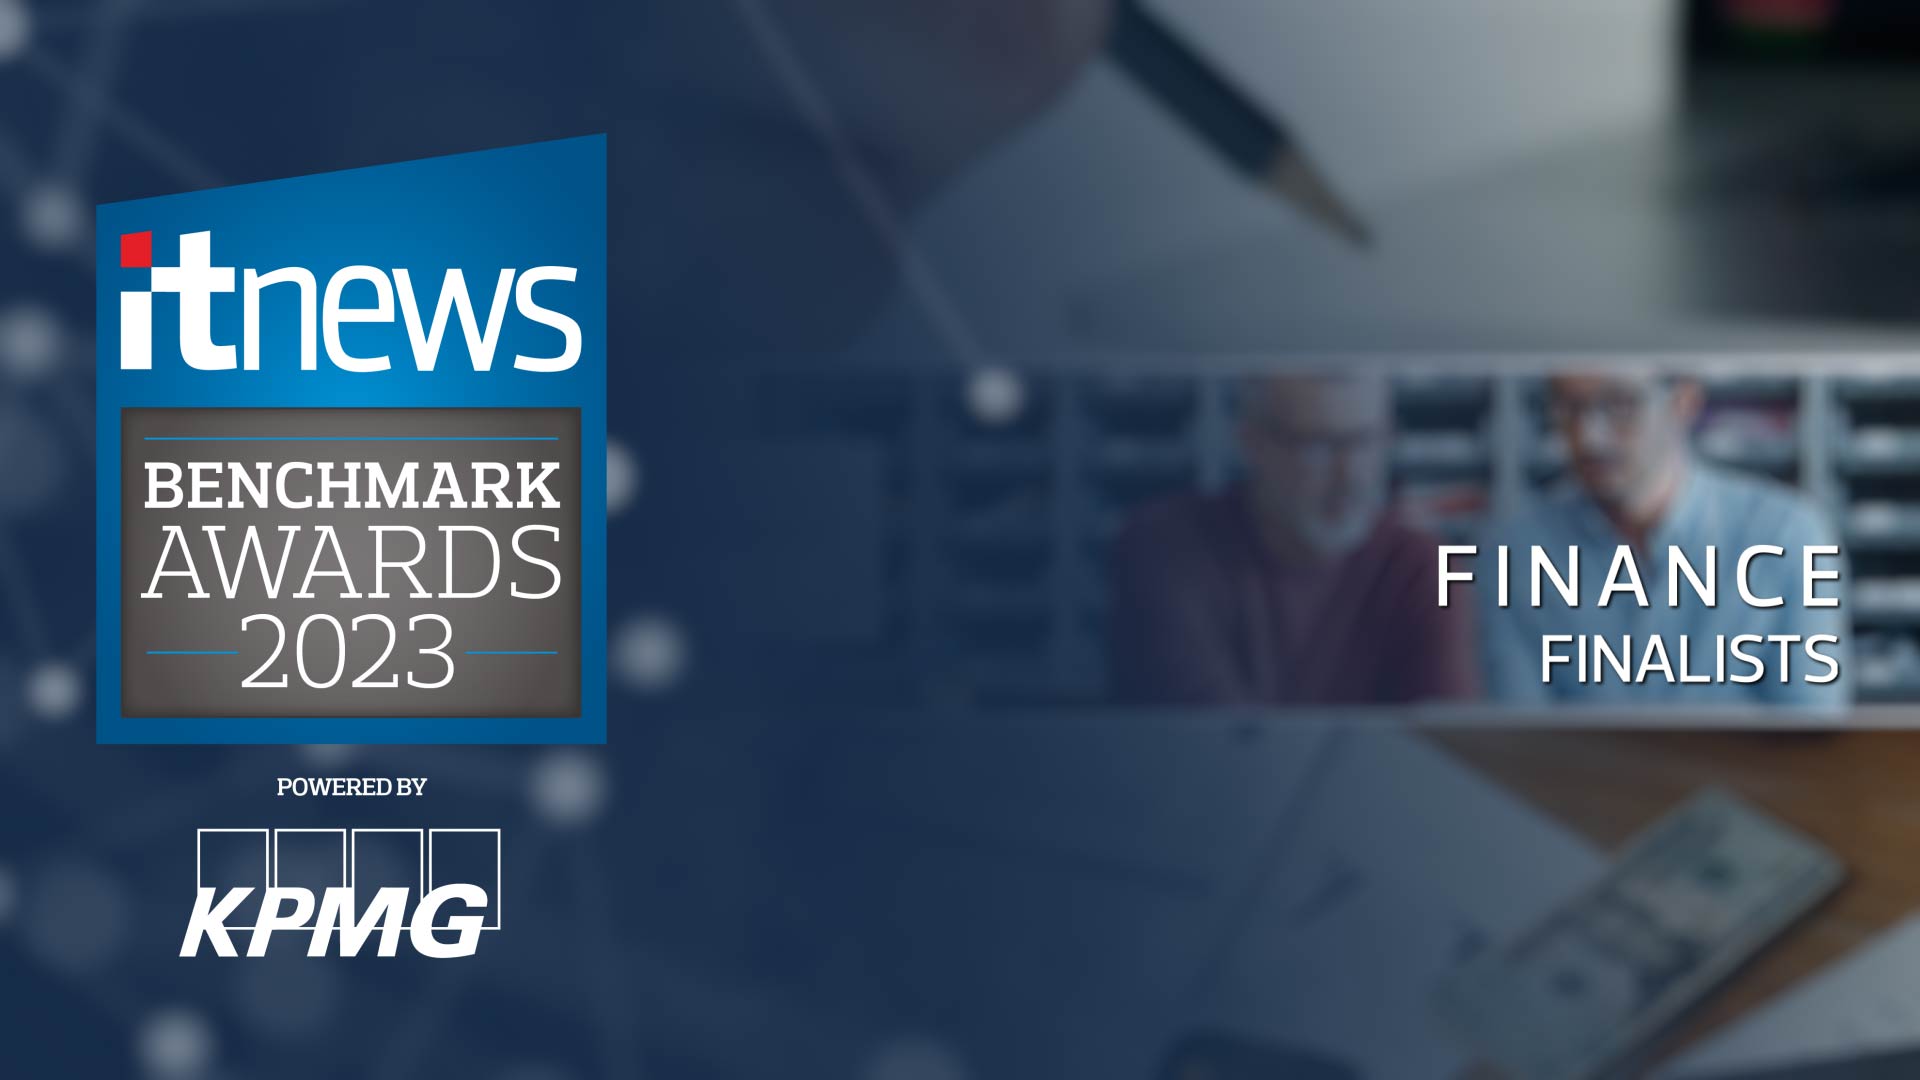 Meet the Finance Finalists in the 2023 iTnews Benchmark Awards